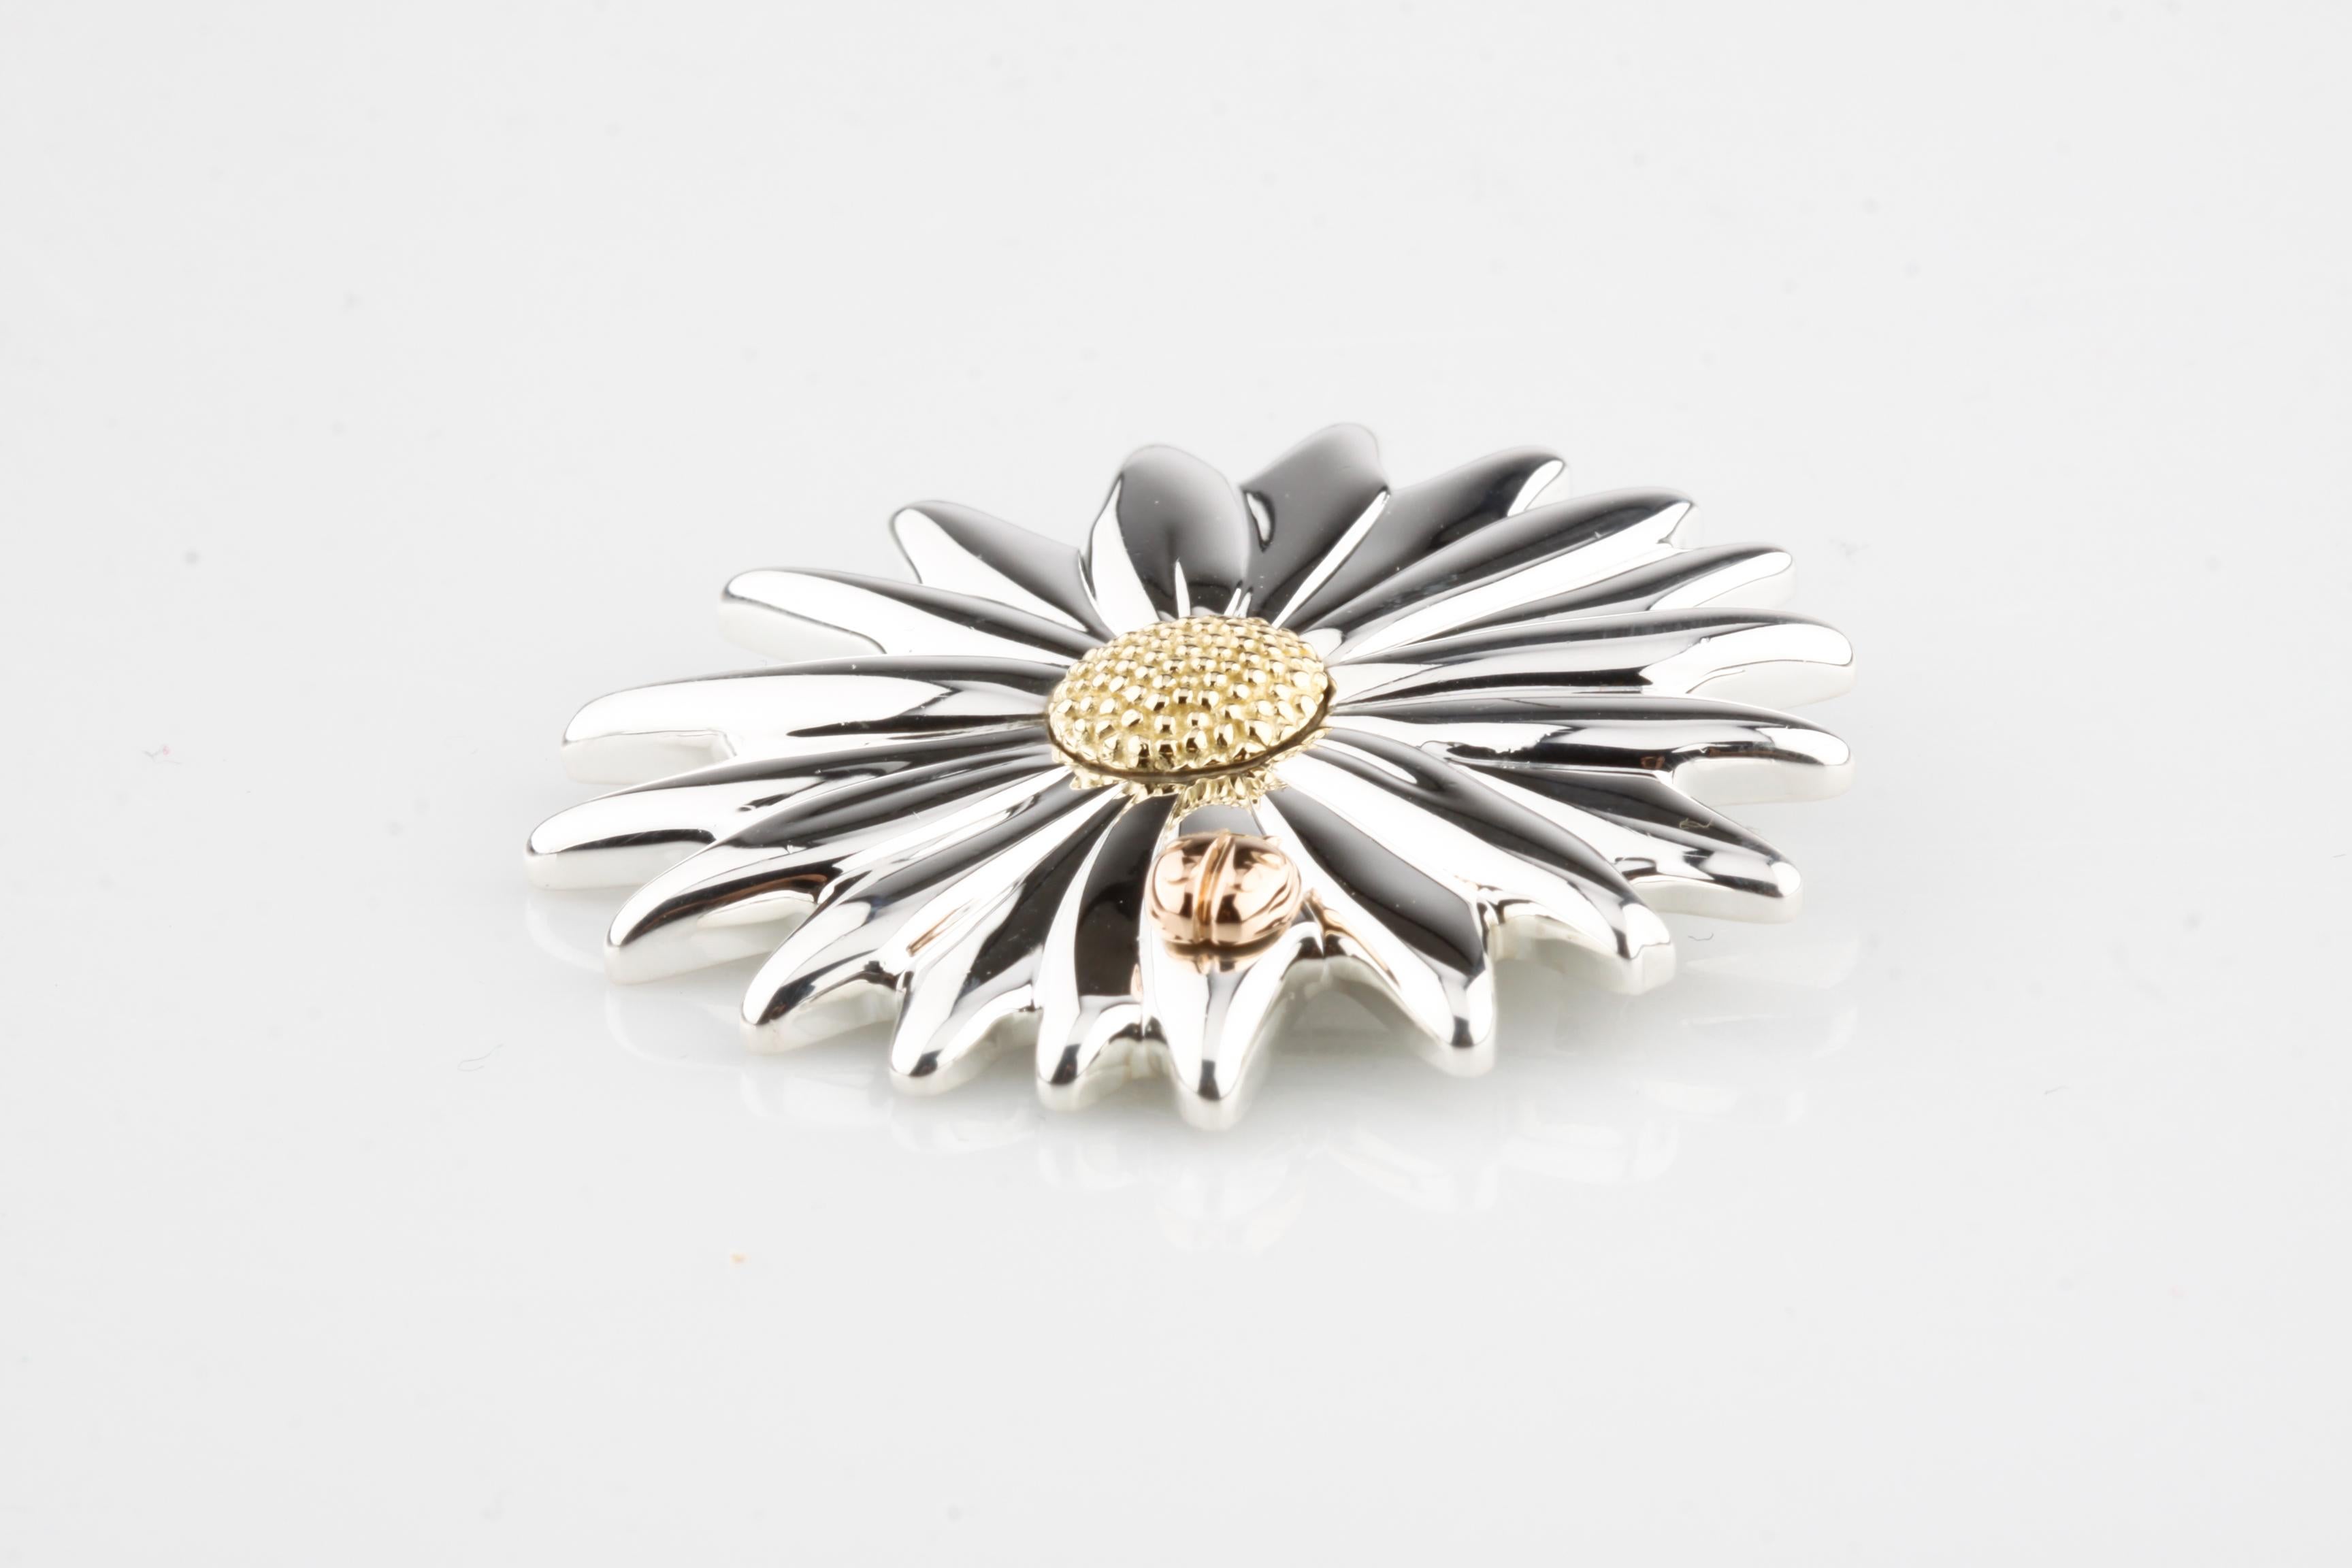 DESIGNER: Tiffany & co. 
METAL: Sterling Silver & 18K Yellow and Rose Gold
SIZE: 2